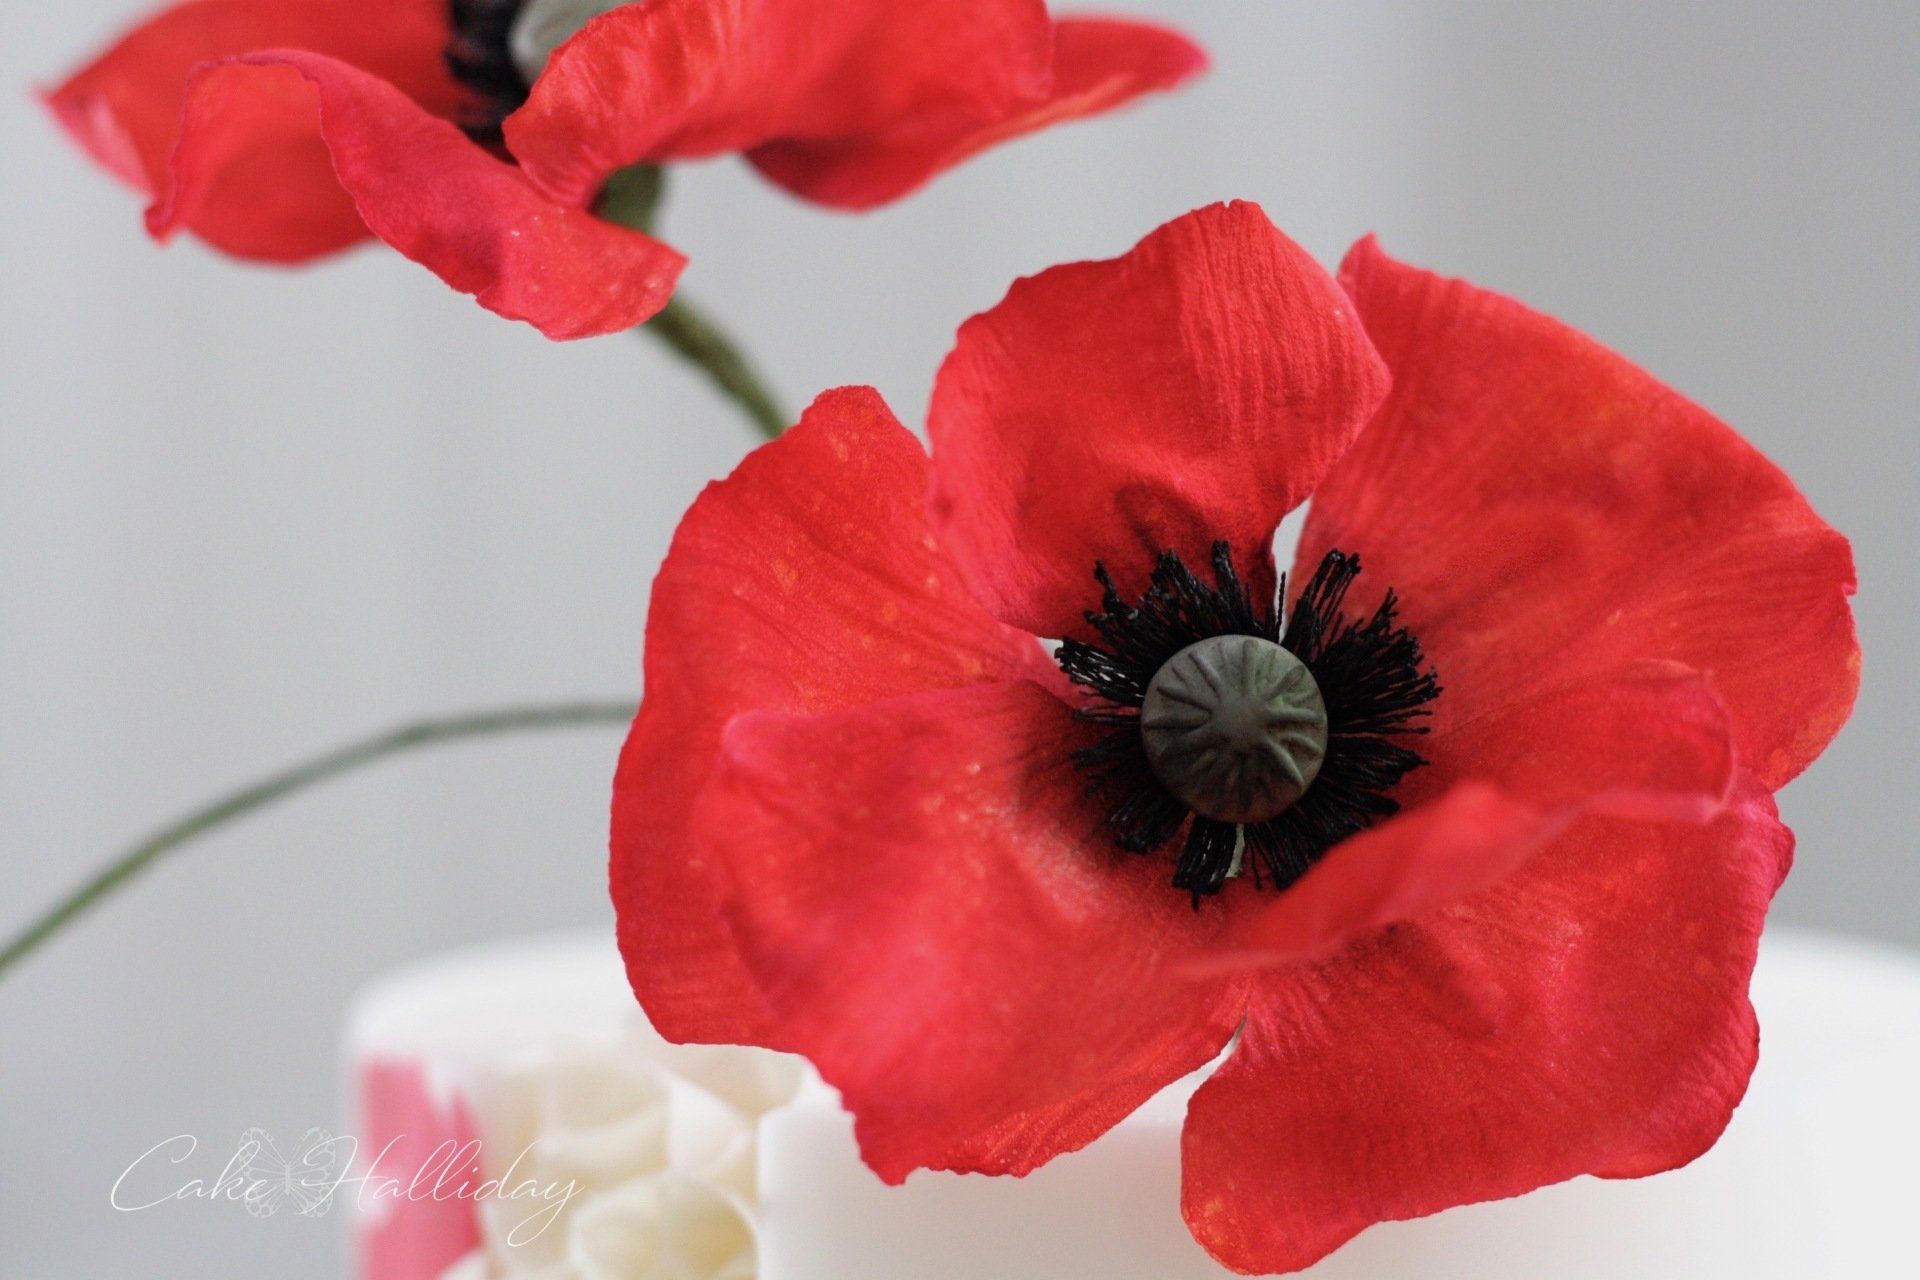 Wafer paper & painted poppies cake with ruffles